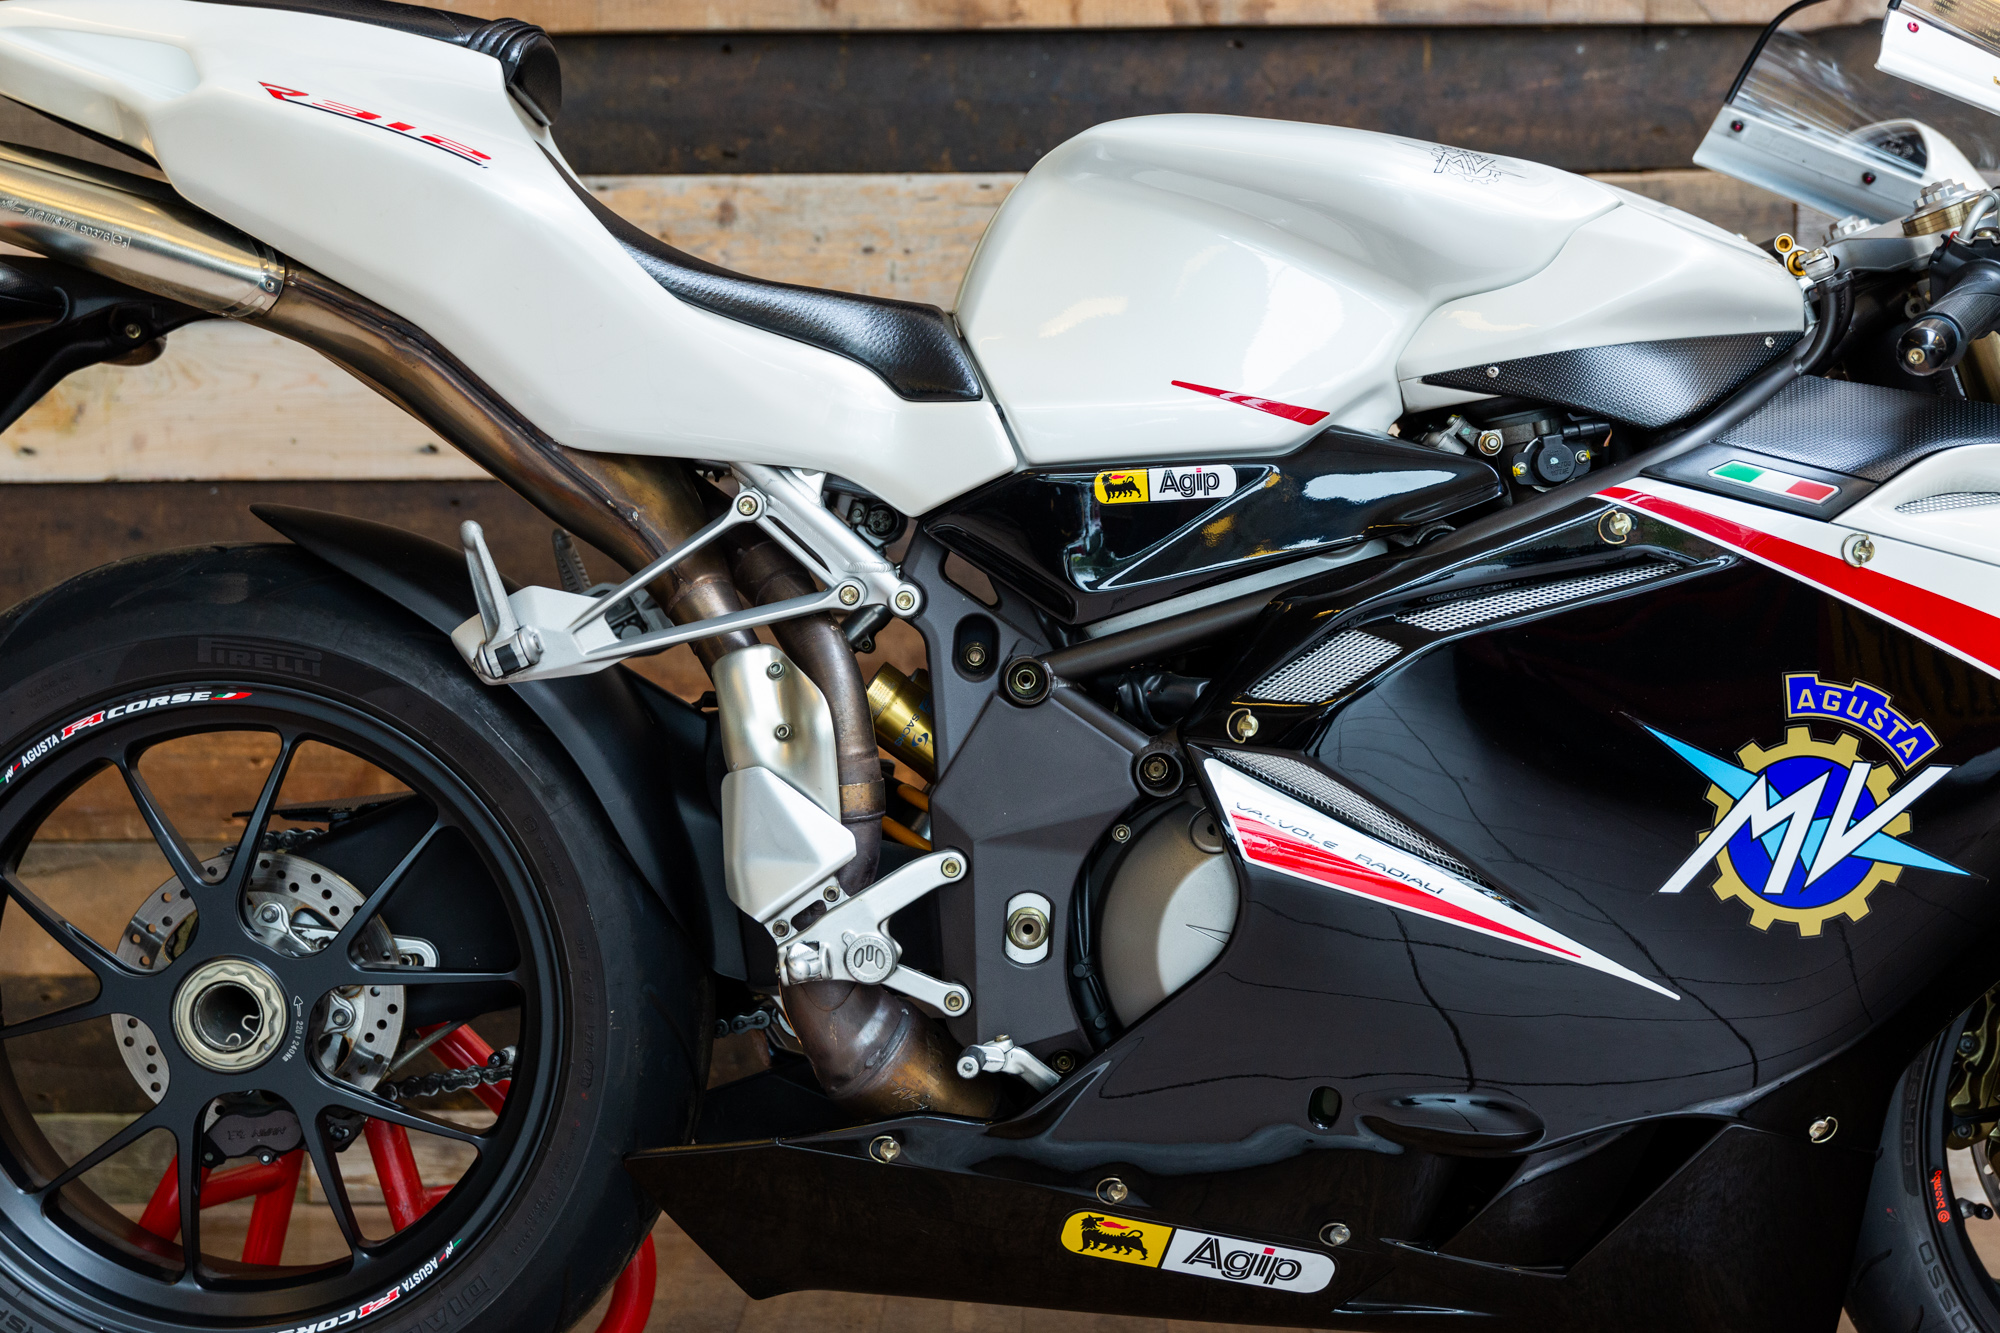 2010 MV AGUSTA F4 1000 R 312 for sale by auction in Henley-on